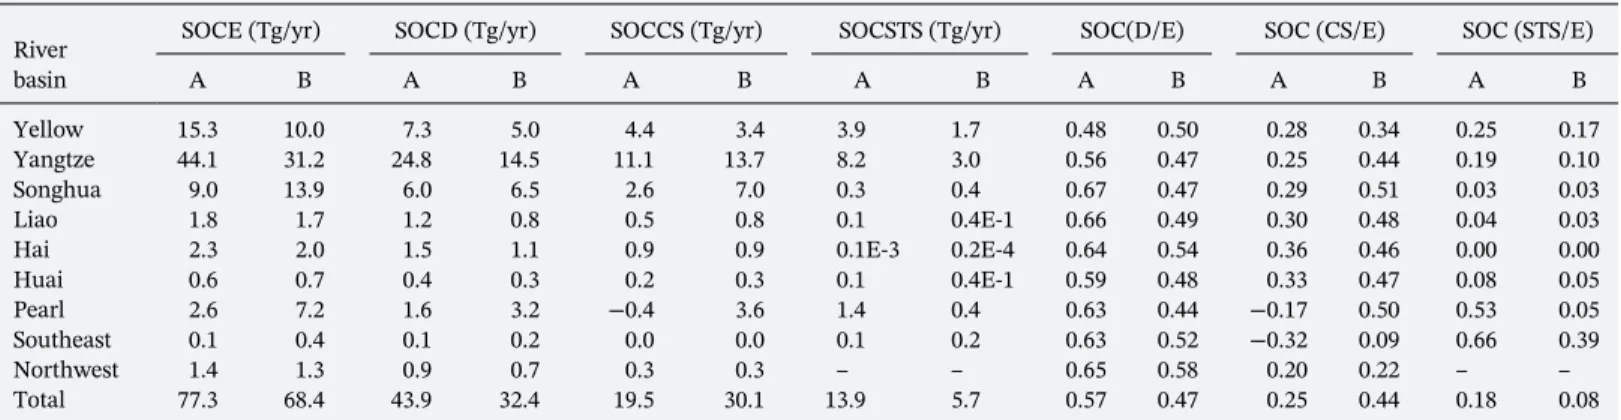 Figure 5. Spatial distributions of the magnitude and changes in the deposition rate of soil and SOC